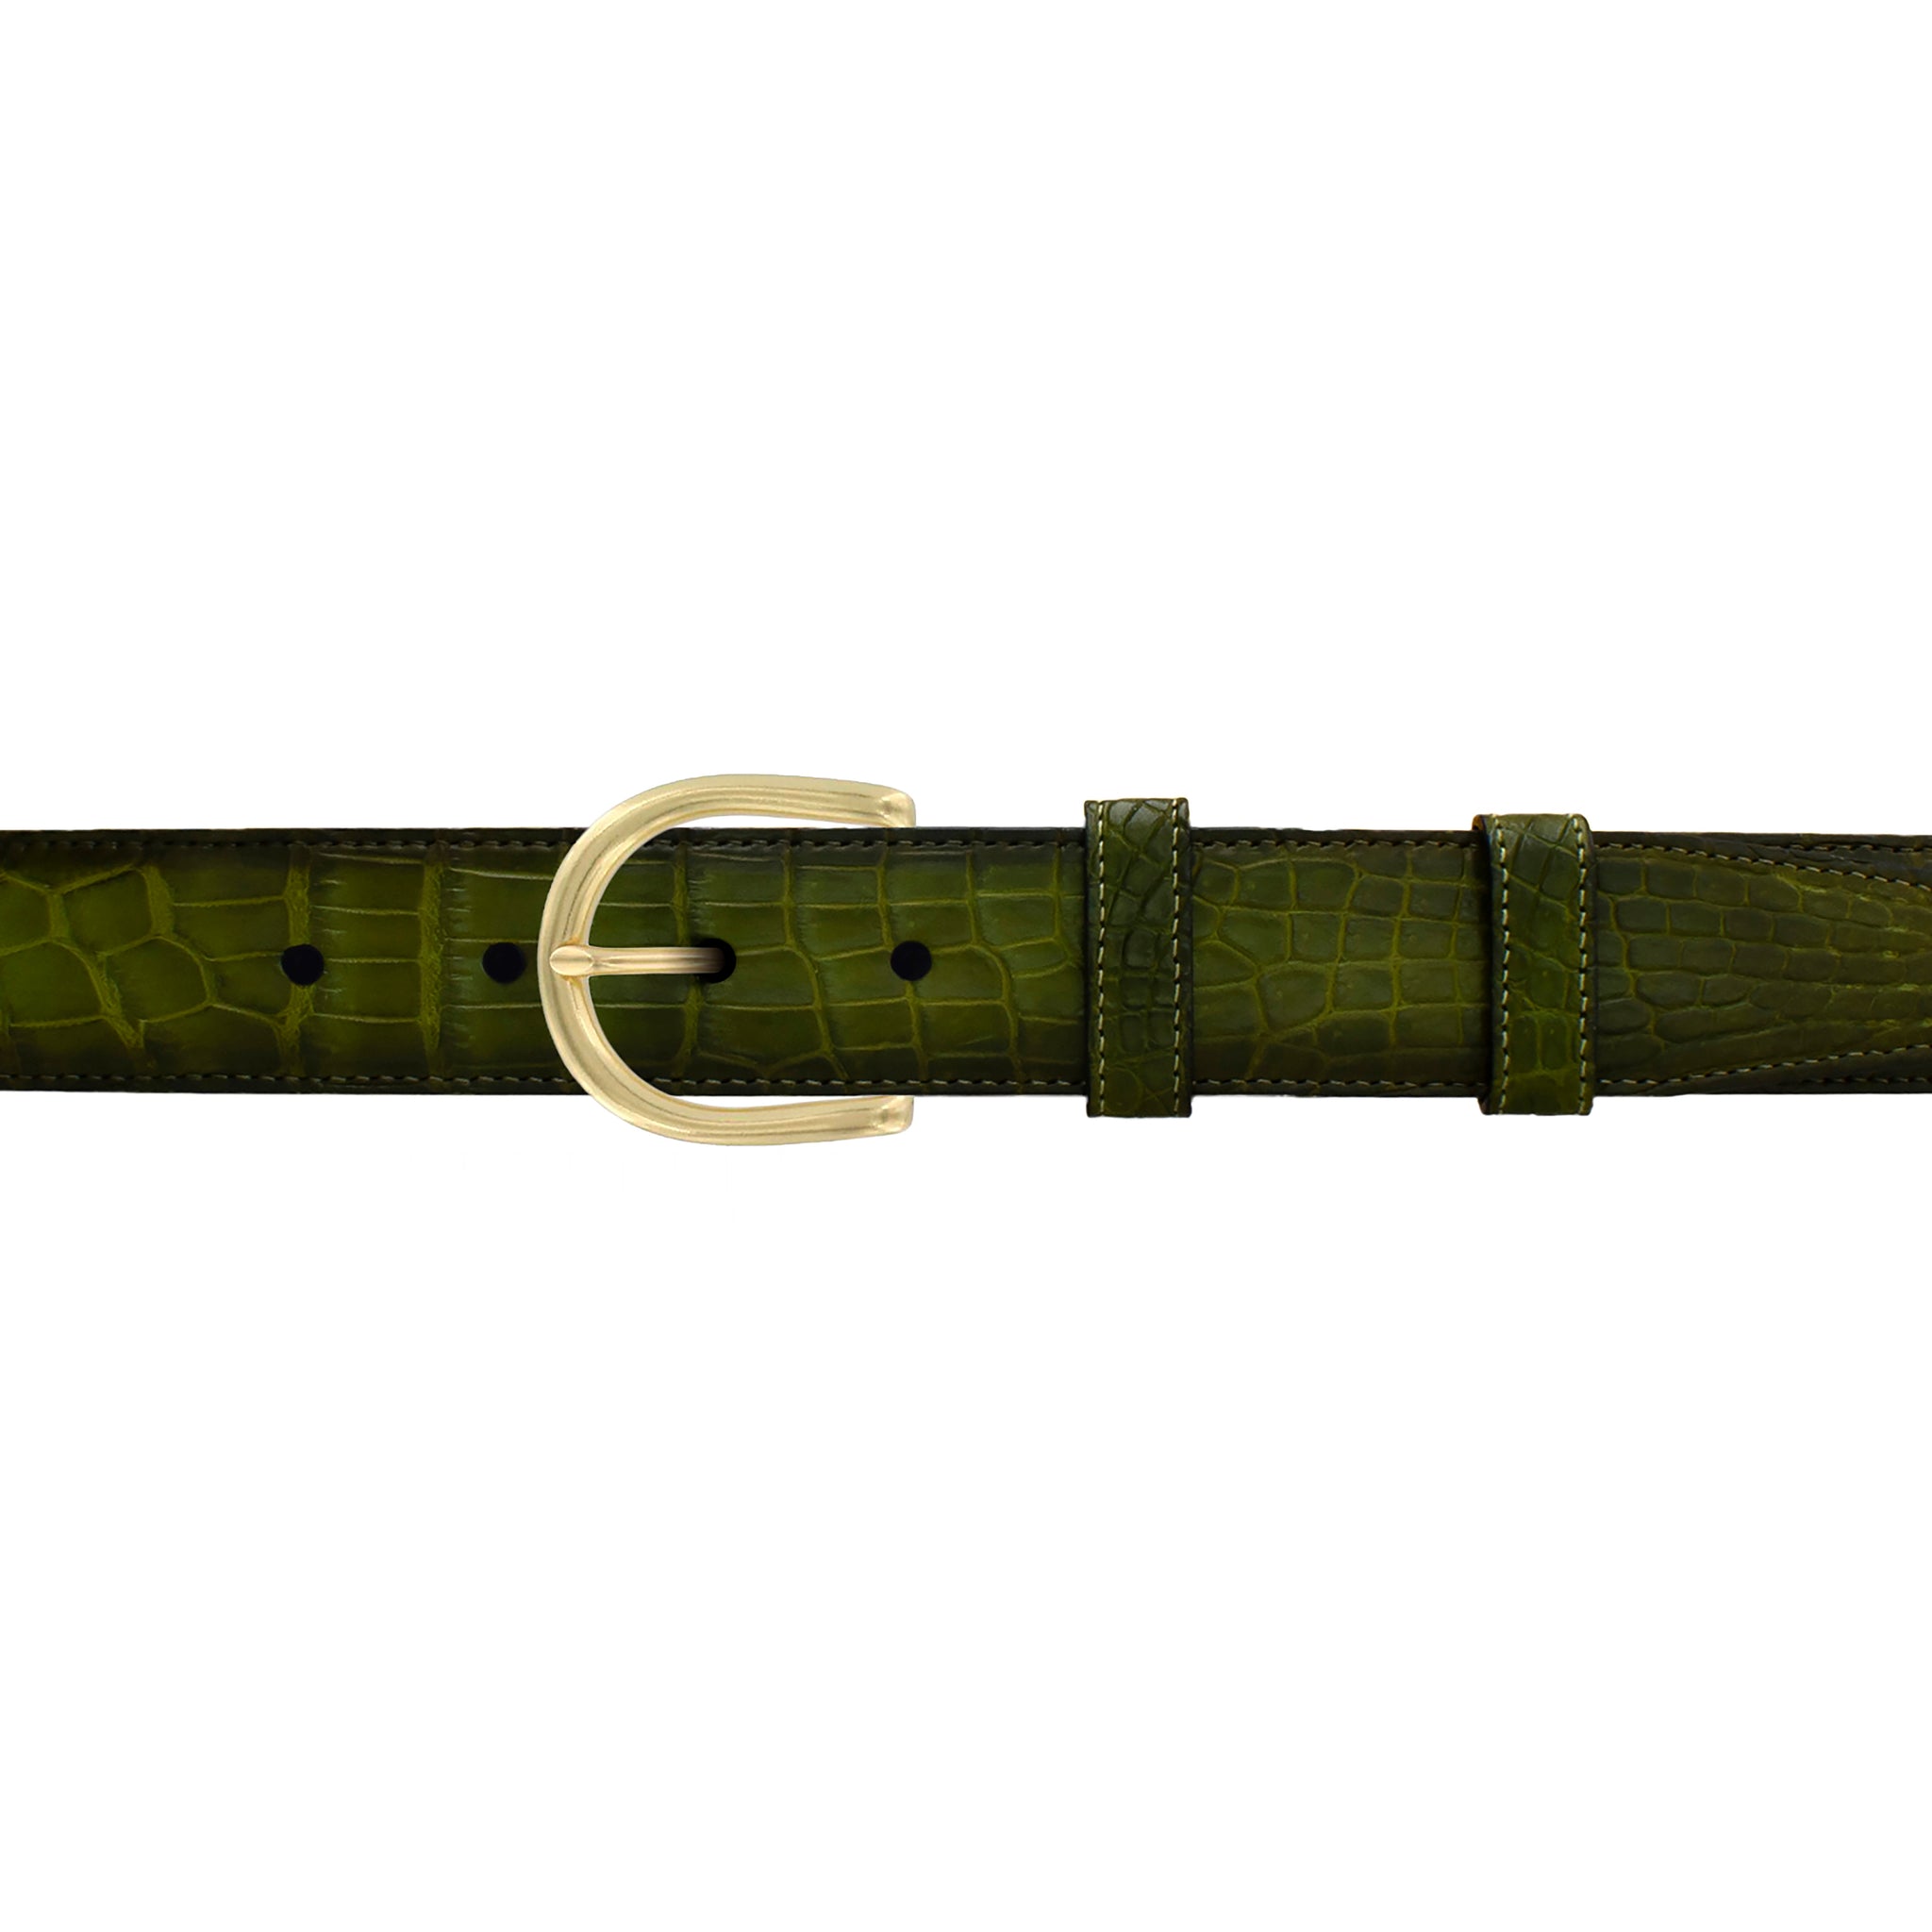 1 1/4" Pine Patina Belt with Denver Casual Buckle in Brass